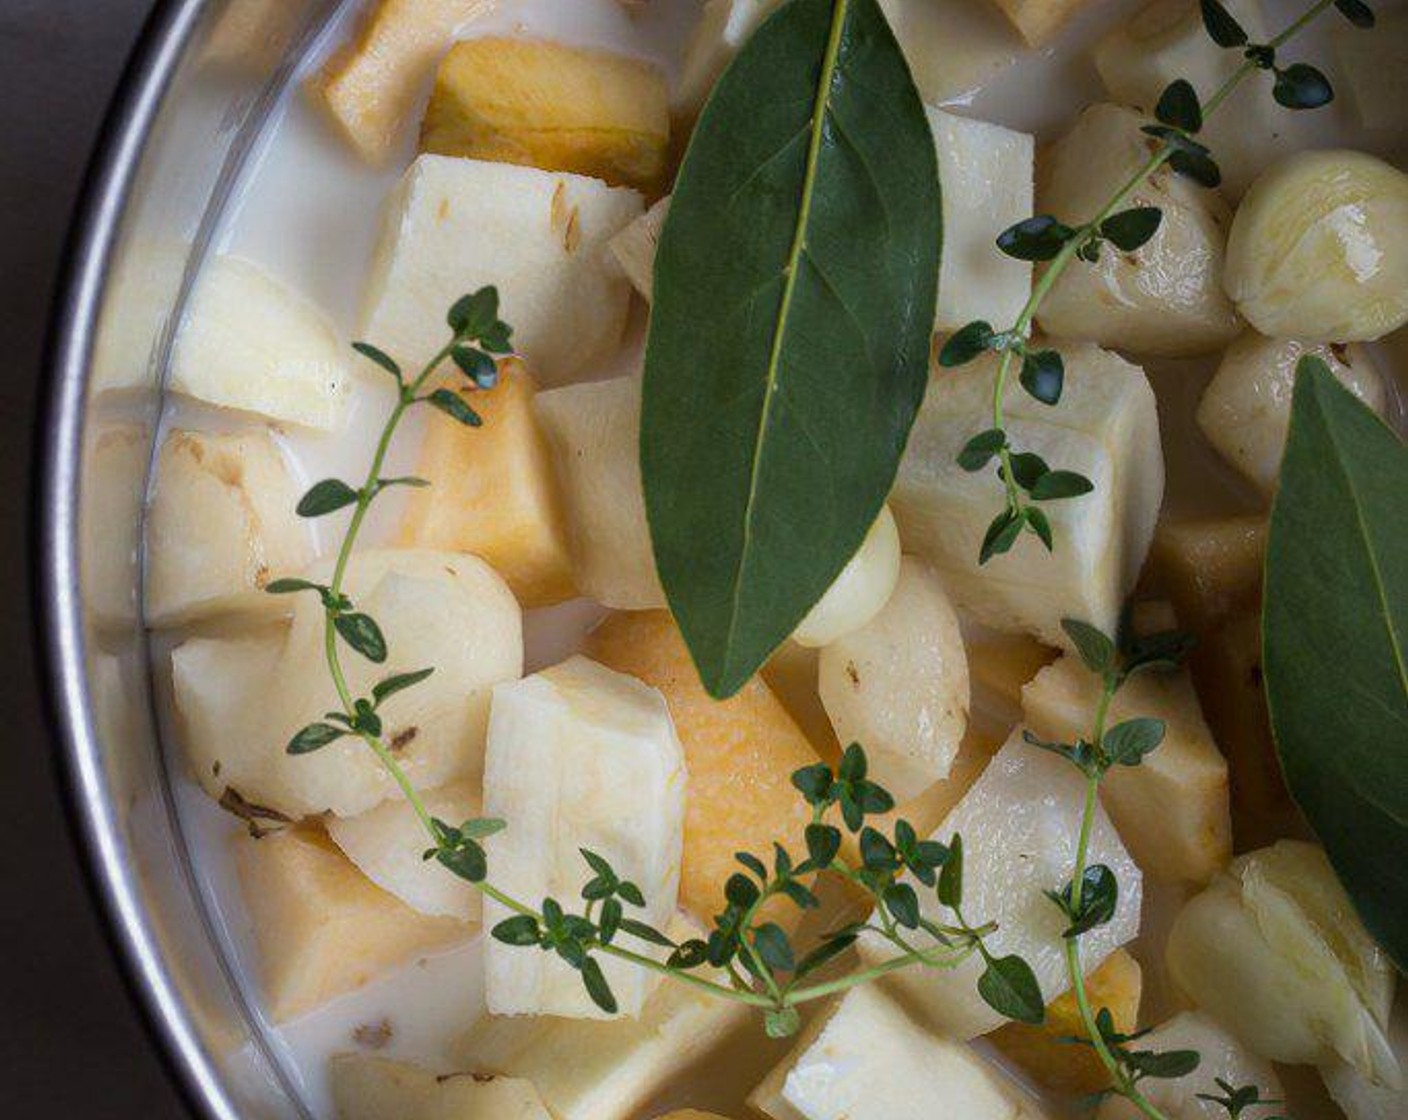 step 1 Add Parsnips (4), Golden Delicious Apples (2), Jerusalem Artichokes (2 1/4 cups), Garlic (2 cloves), Whole Milk (2 cups), Fresh Thyme (3 sprigs), Bay Leaves (2) and a couple of pinches of  Salt (to taste) to a medium pot and bring to a simmer.